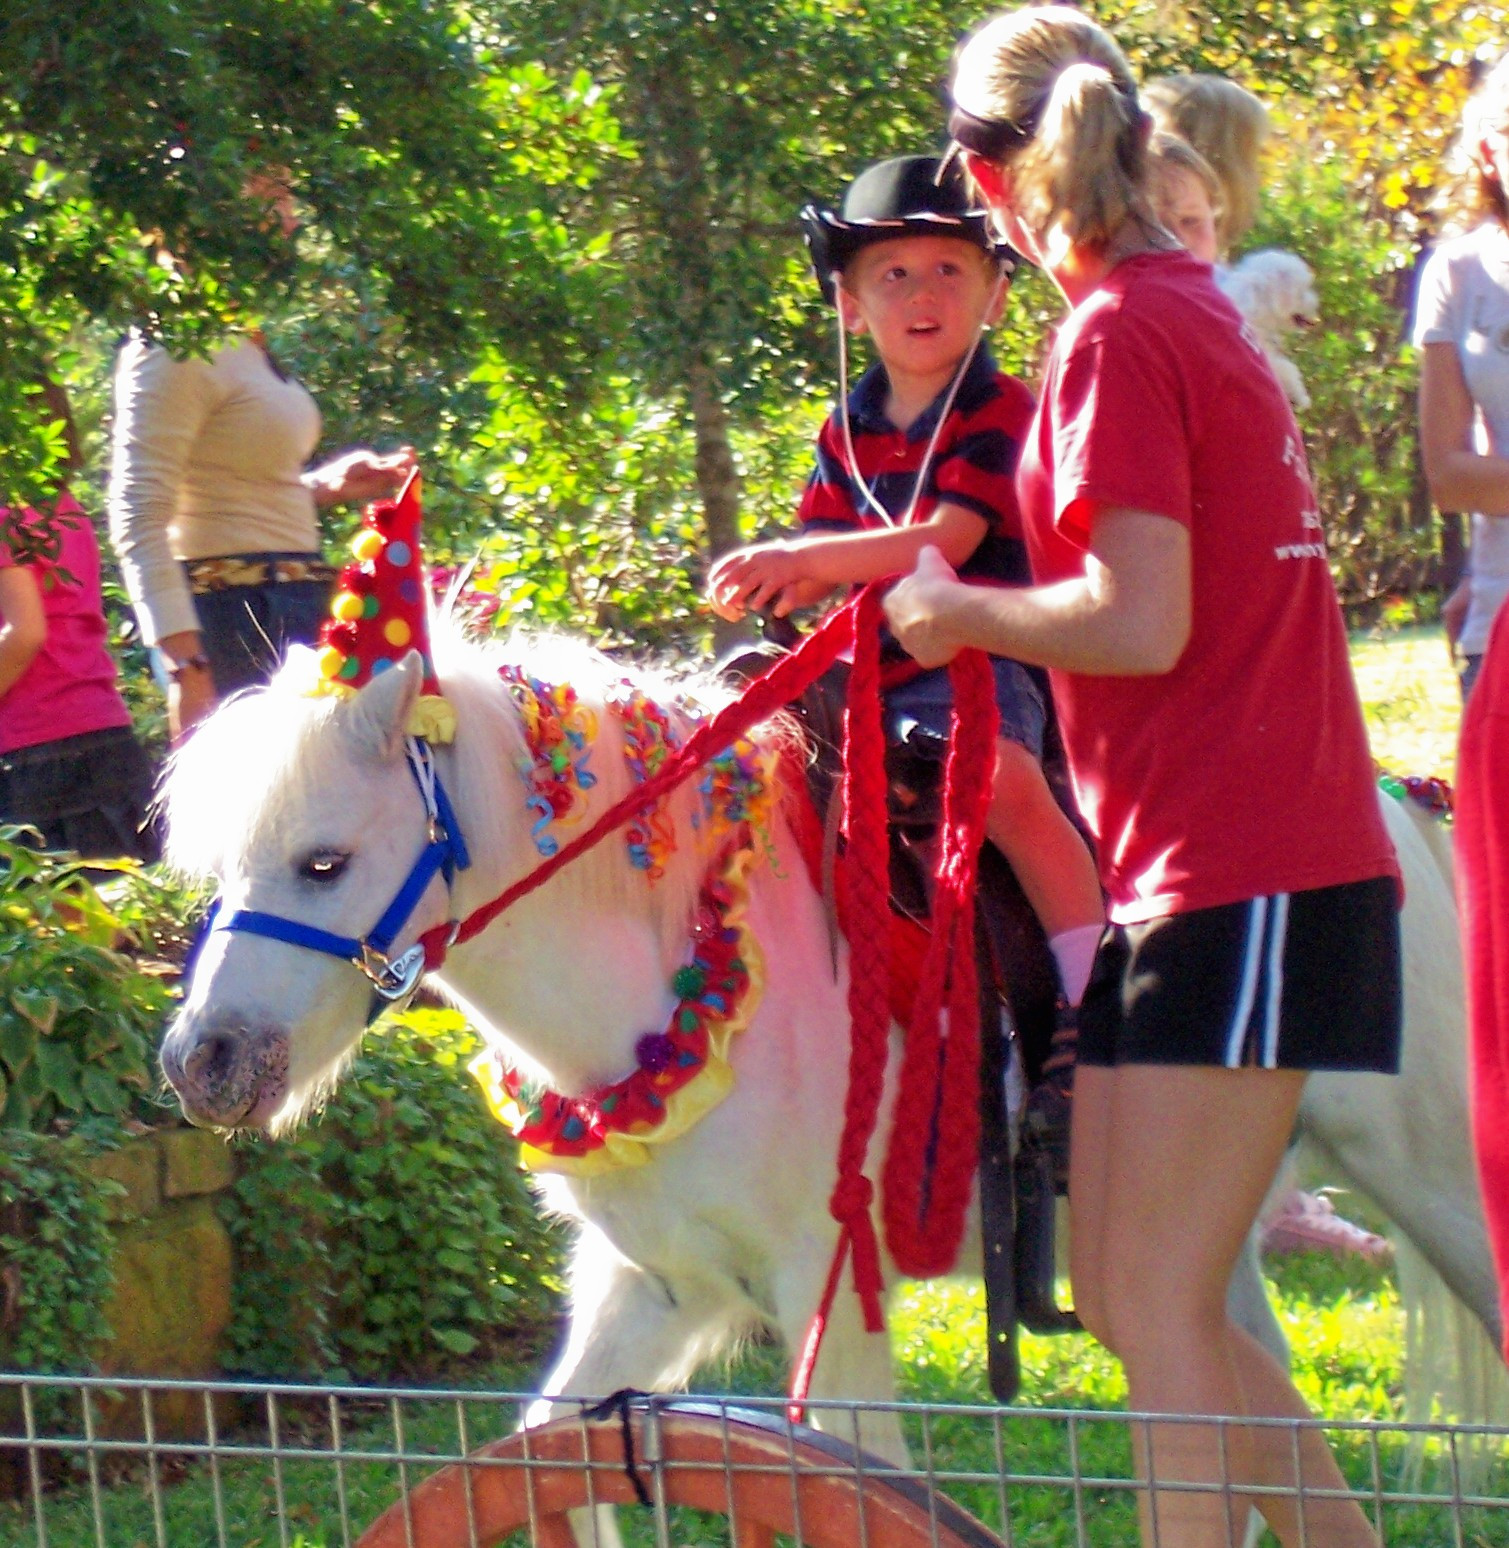 Petting Zoo Rental For Birthday Party
 PONY PARTIES PONY RIDES RENTAL PONY PARTY PETTING ZOO